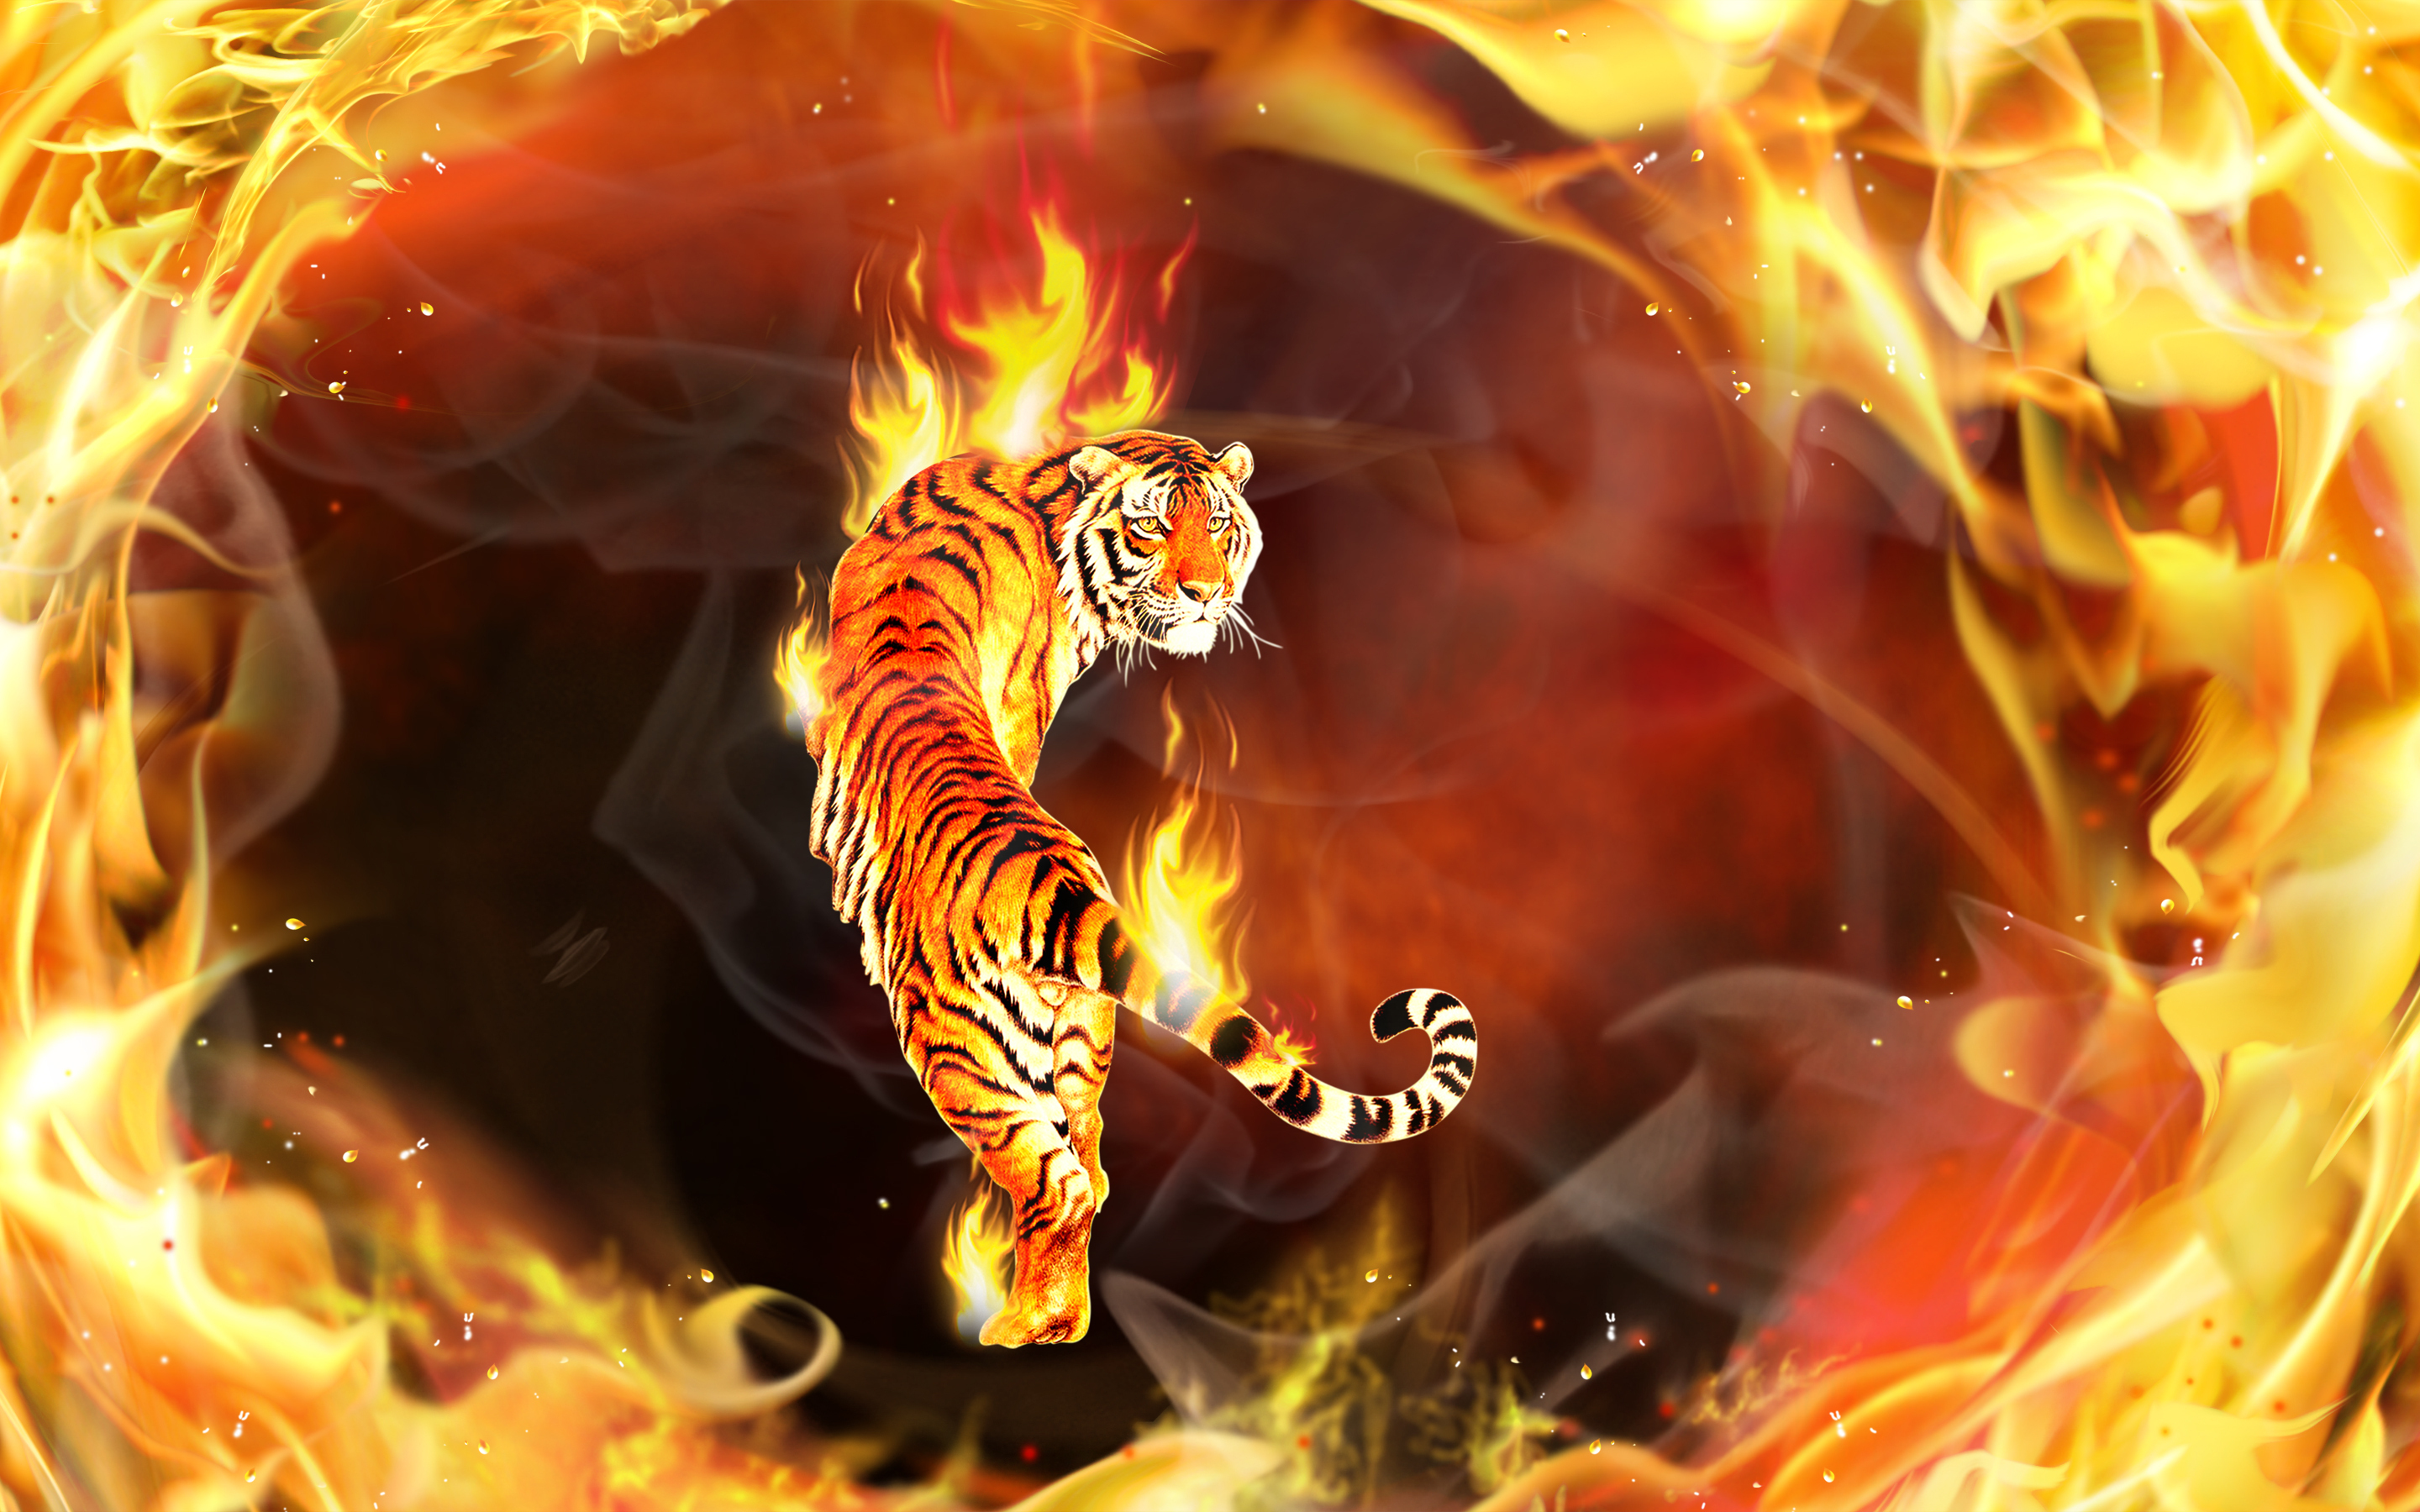 Mobile wallpaper: Fantasy Animals, Psychedelic, 3D, Cgi, Fantasy, Tiger,  Fire, Flame, 272606 download the picture for free.